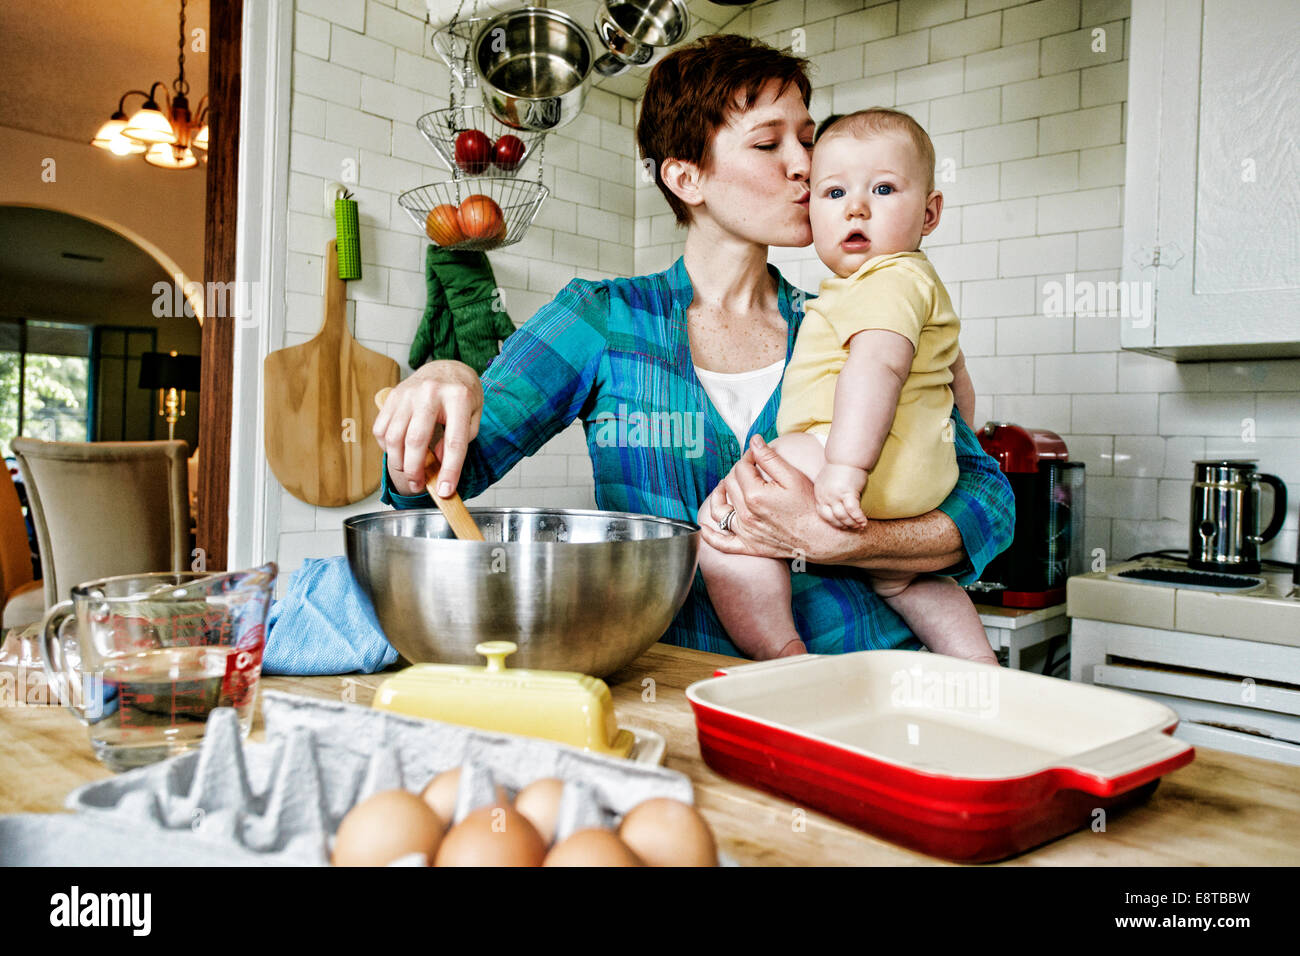 Caucasian mother kissing baby and cooking in kitchen Stock Photo